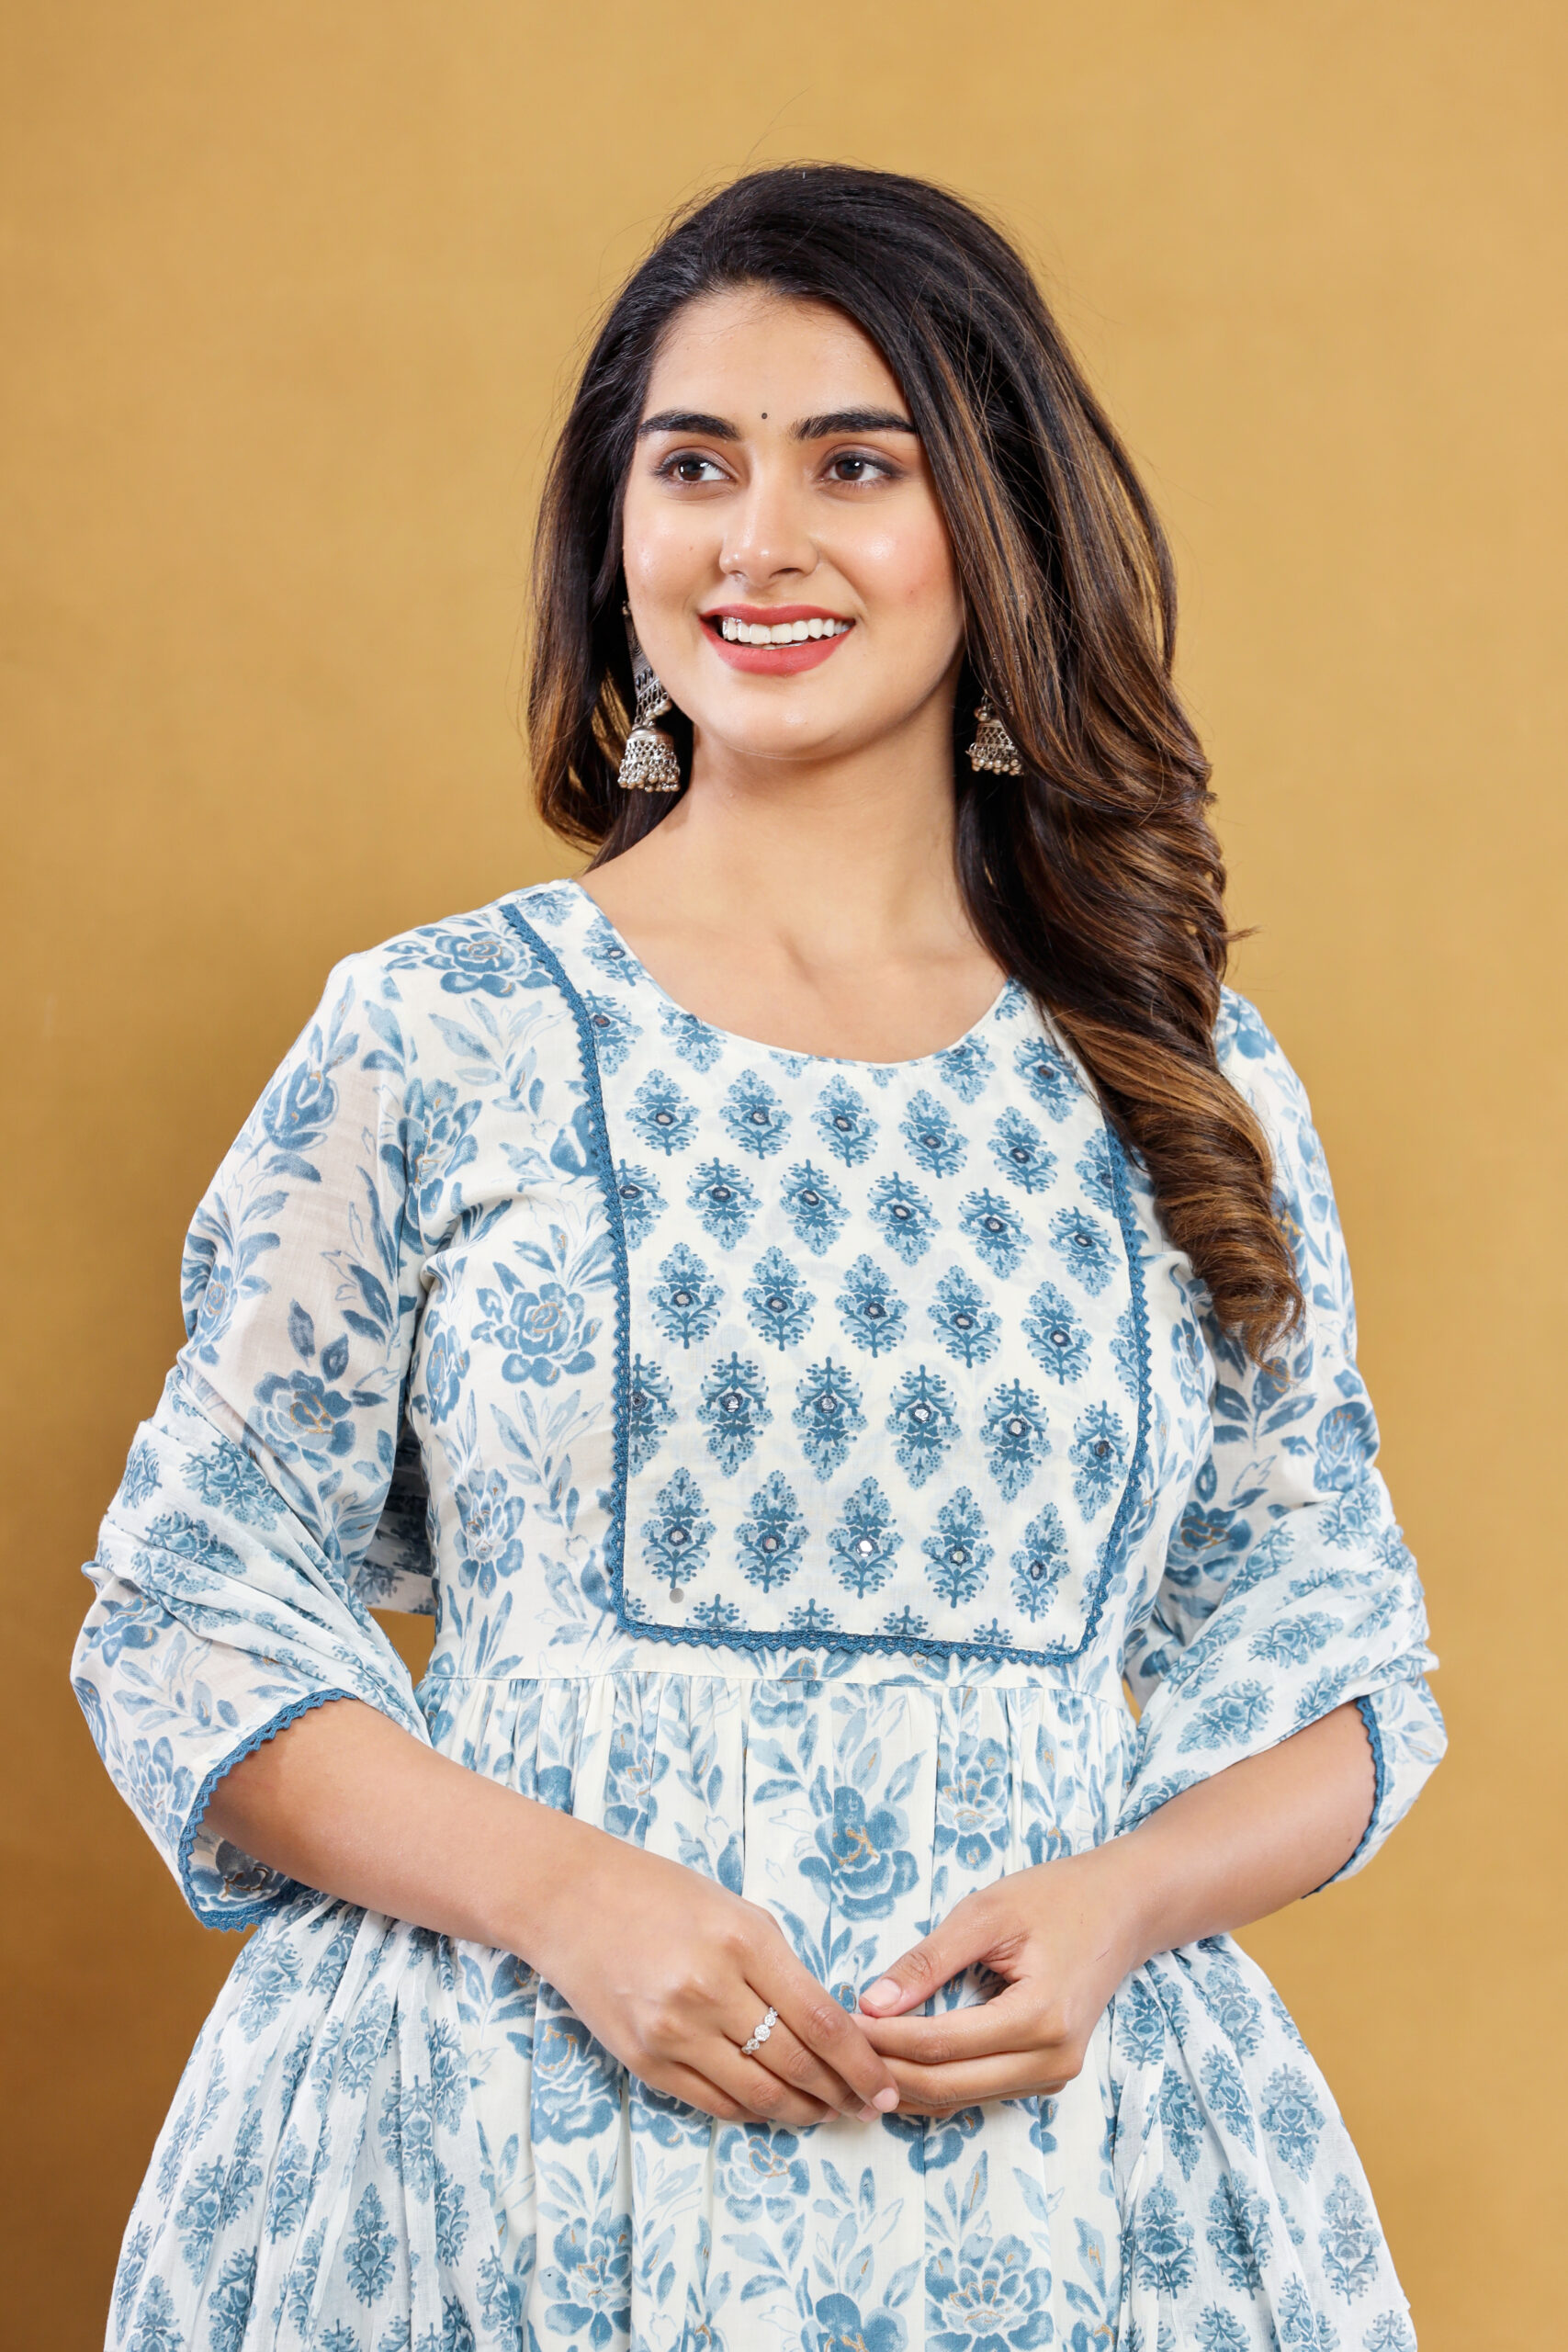 Where are the best low-range kurti wholesalers in India? - Quora